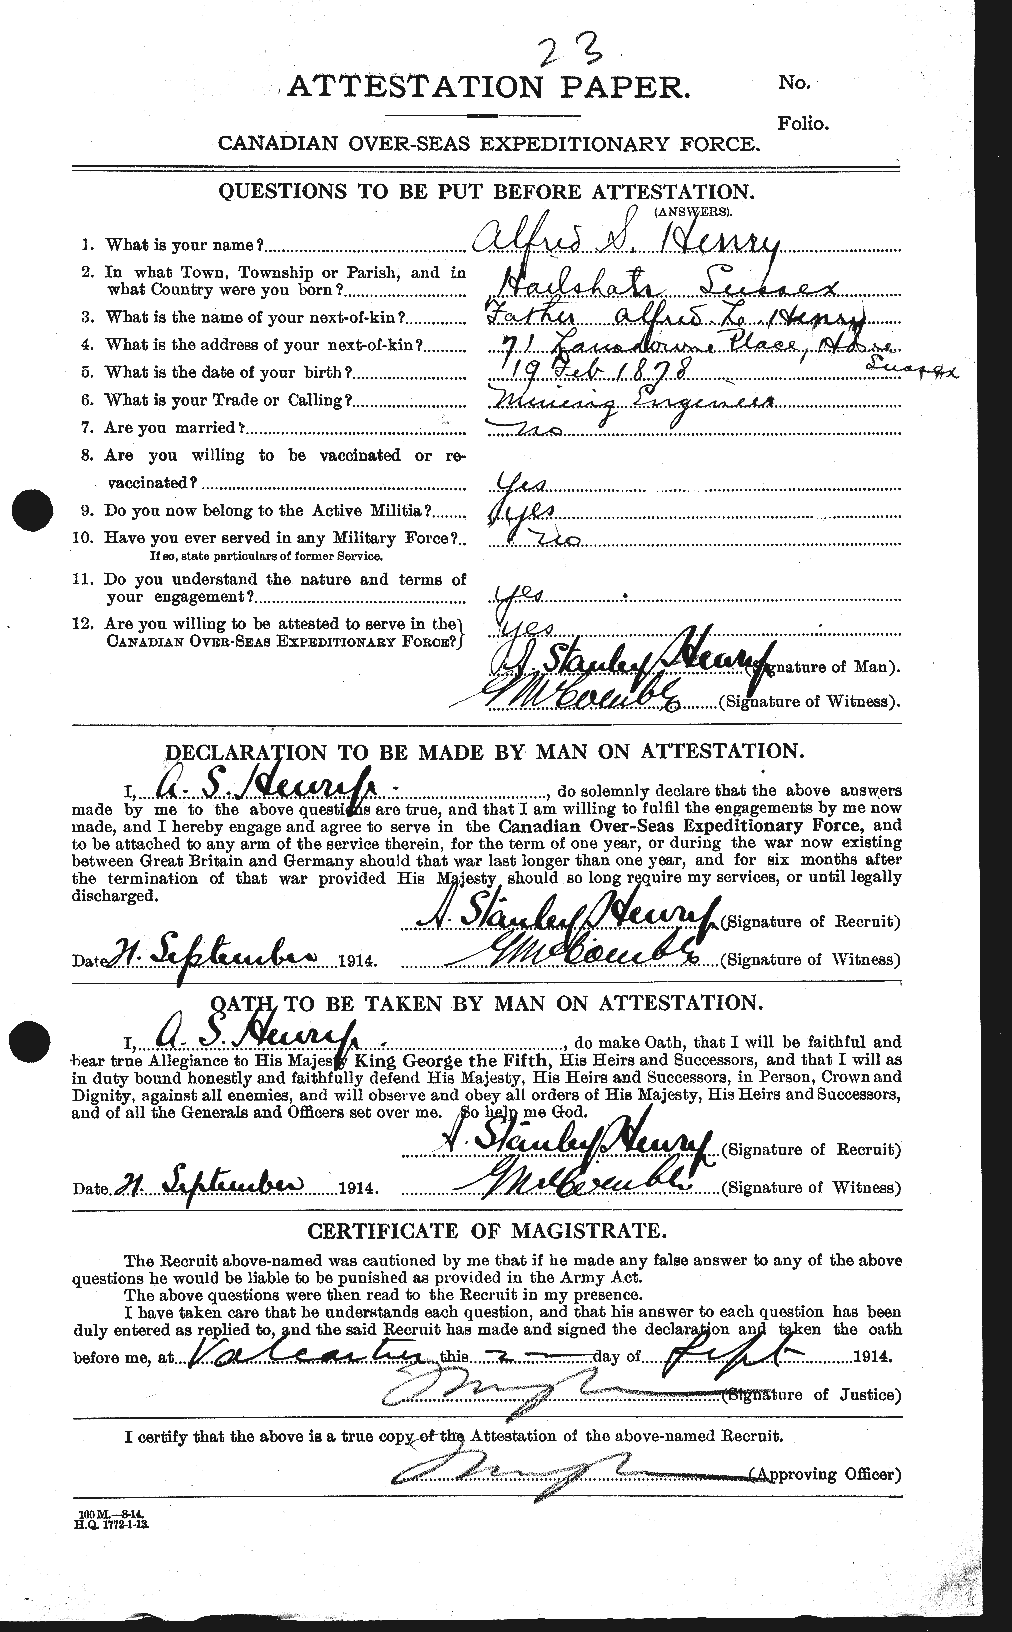 Personnel Records of the First World War - CEF 392771a